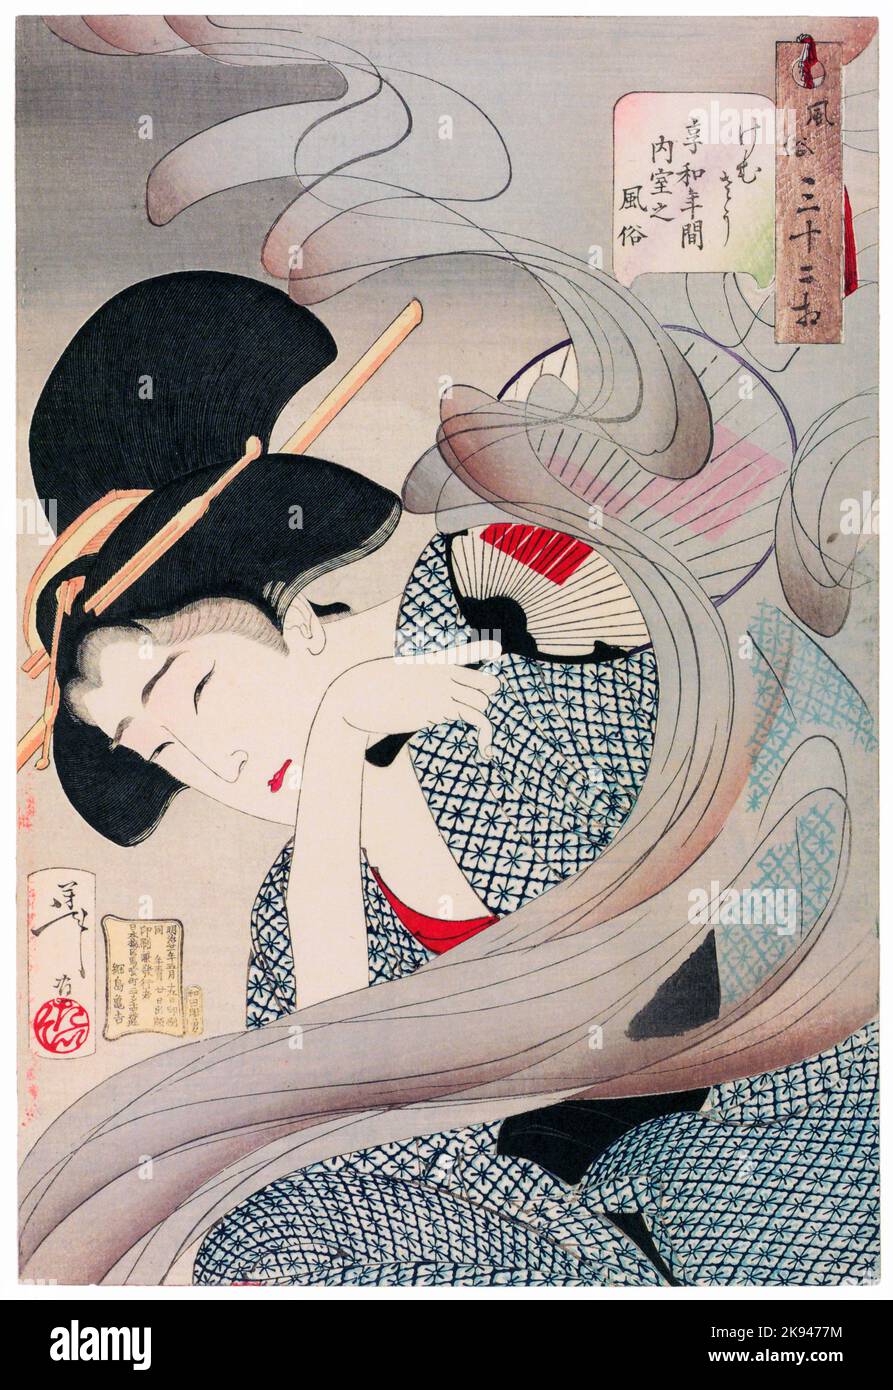 Tsukioka Yoshitoshi – Looks Smoky’, Mannerisms of a Housewife from the Kyowa Period from Thirty-two Aspects of Women Stock Photo